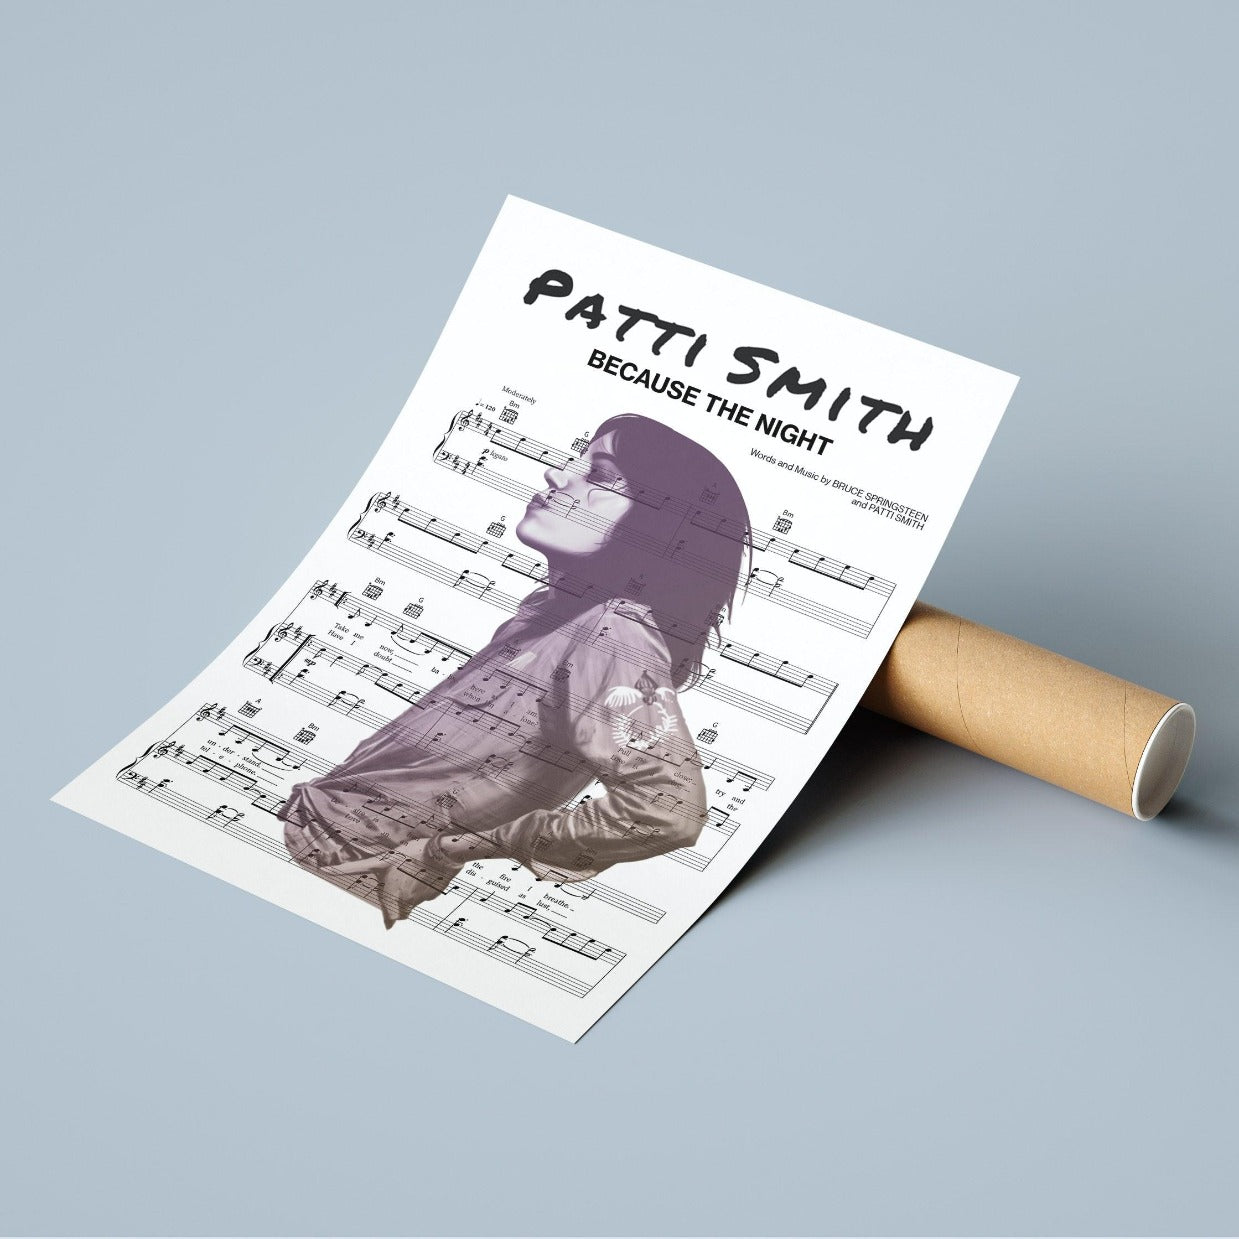 Looking for something to hang in your dorm or bedroom? This Patti Smith - Because the Night Poster is perfect for you! Printed on high-quality paper, this poster is perfect for adding a touch of art to any room. And with Patti Smith's iconic image, you can't go wrong.A4 Posters uk By 98types art online.